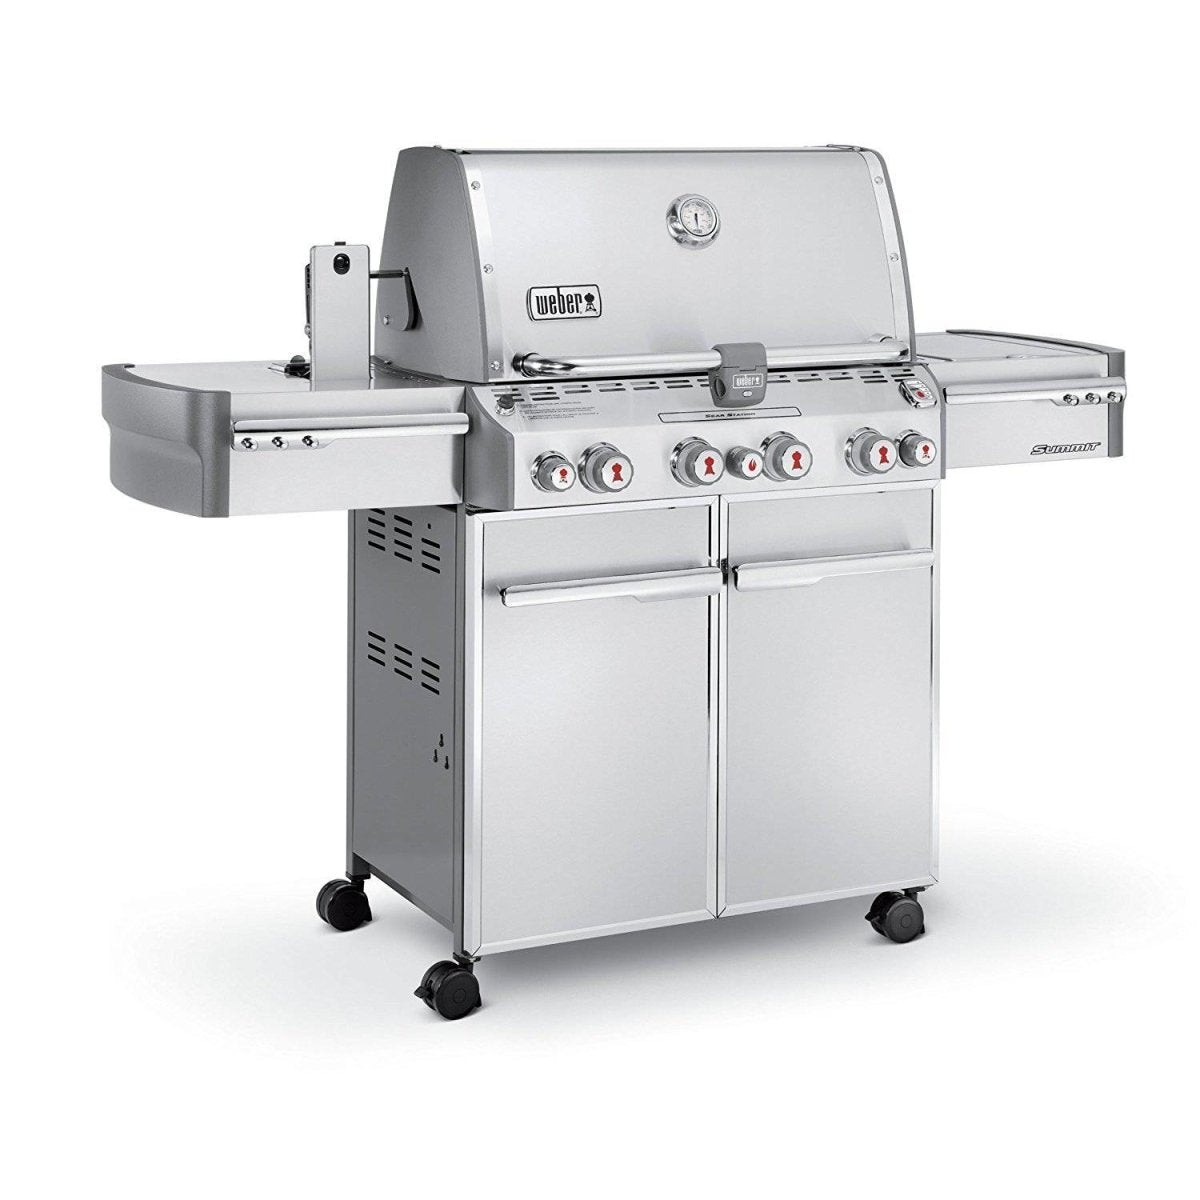 Weber Summit S-470 SS Gas Grill - Texas Star Grill Shop 7170001